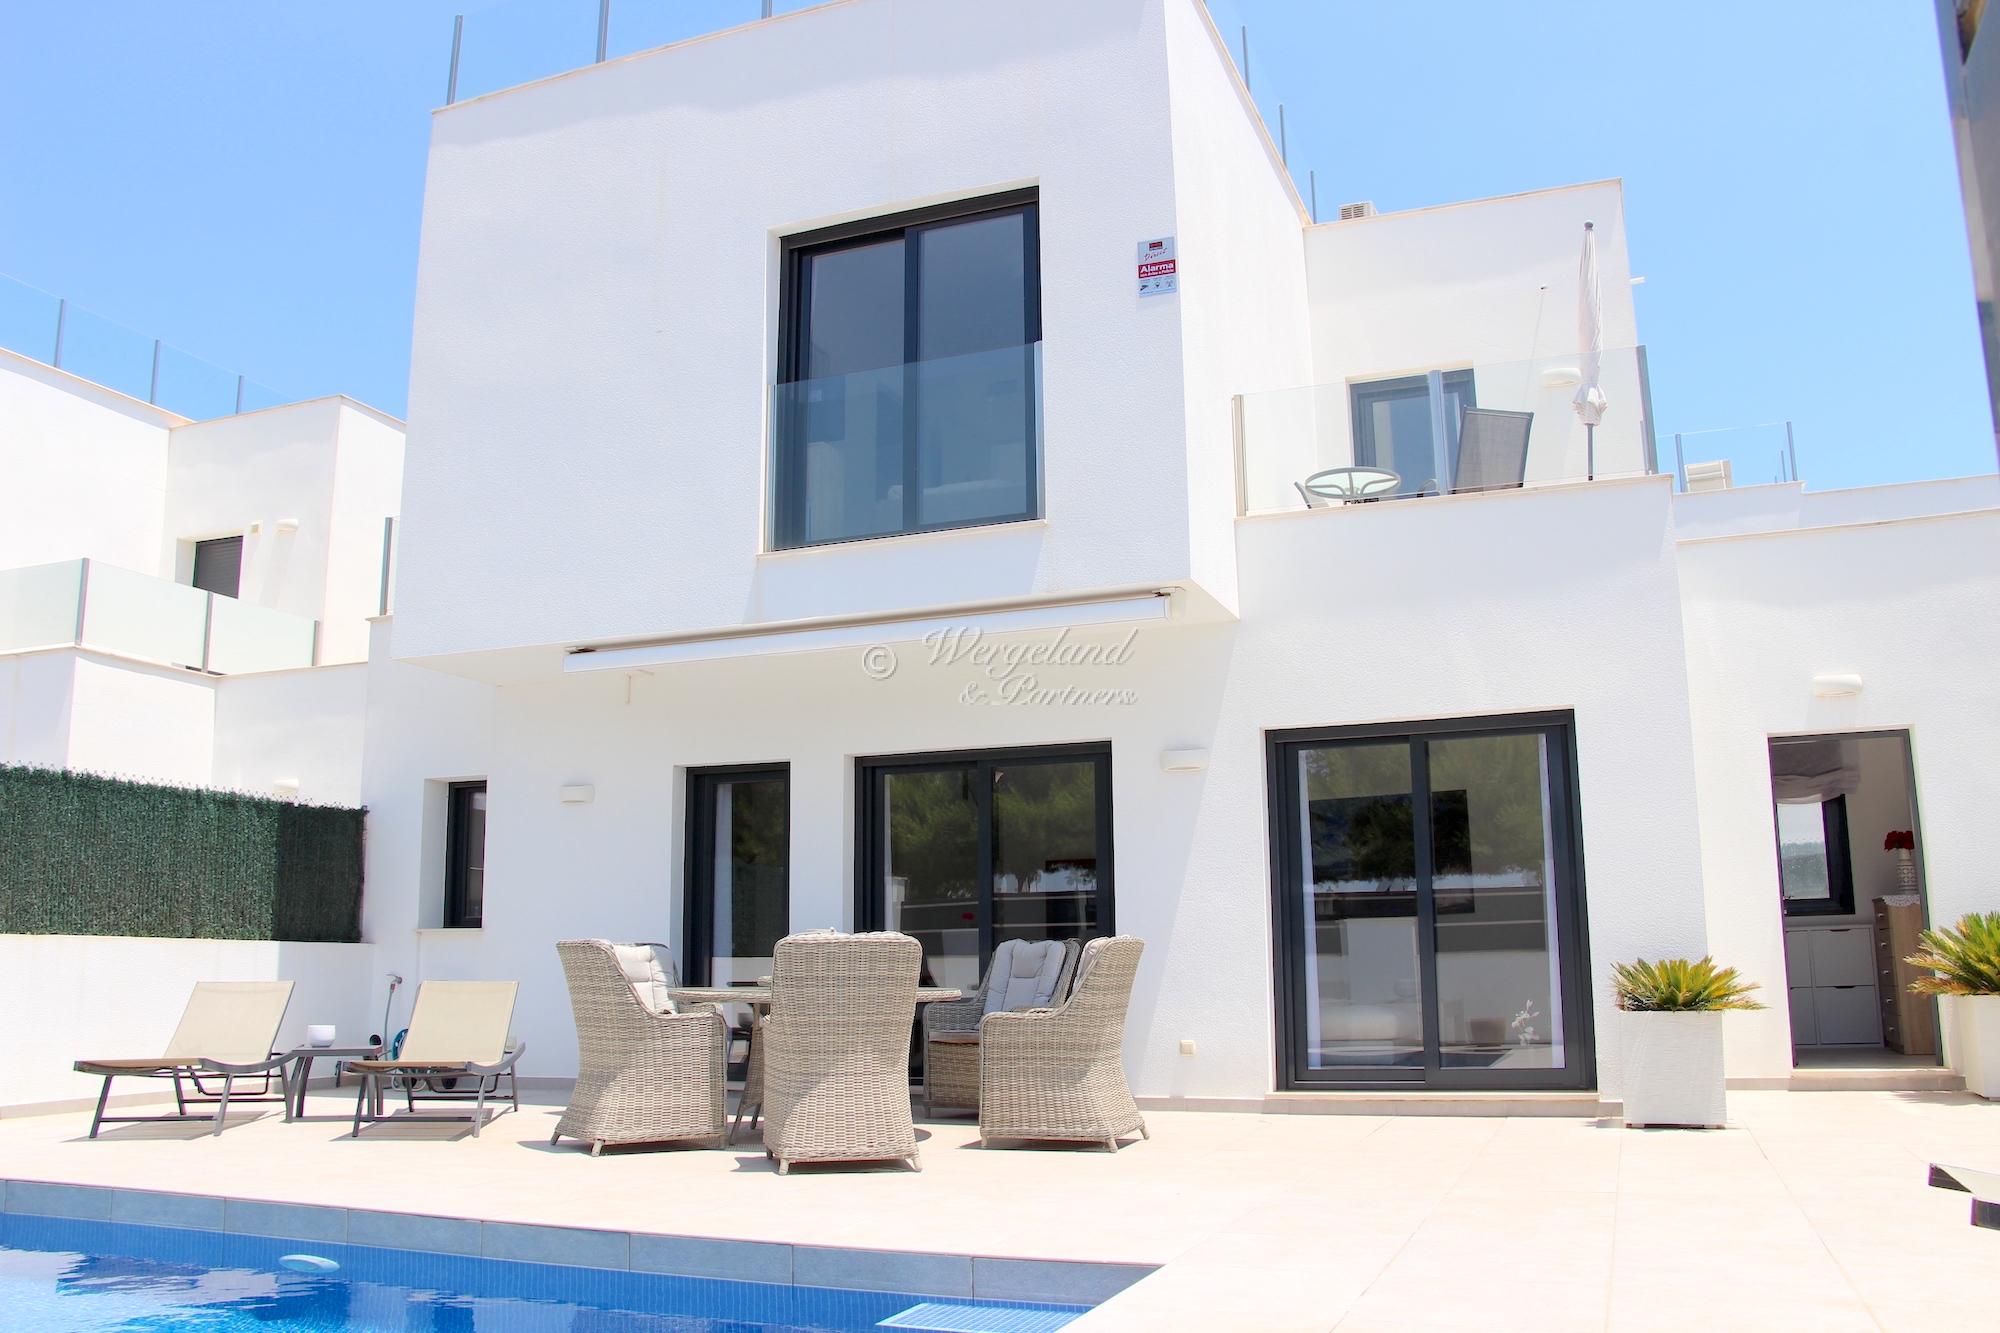 New price! 3 Bedroom furnished modern villa with private salt water pool and roof terrace in popular area [W8]